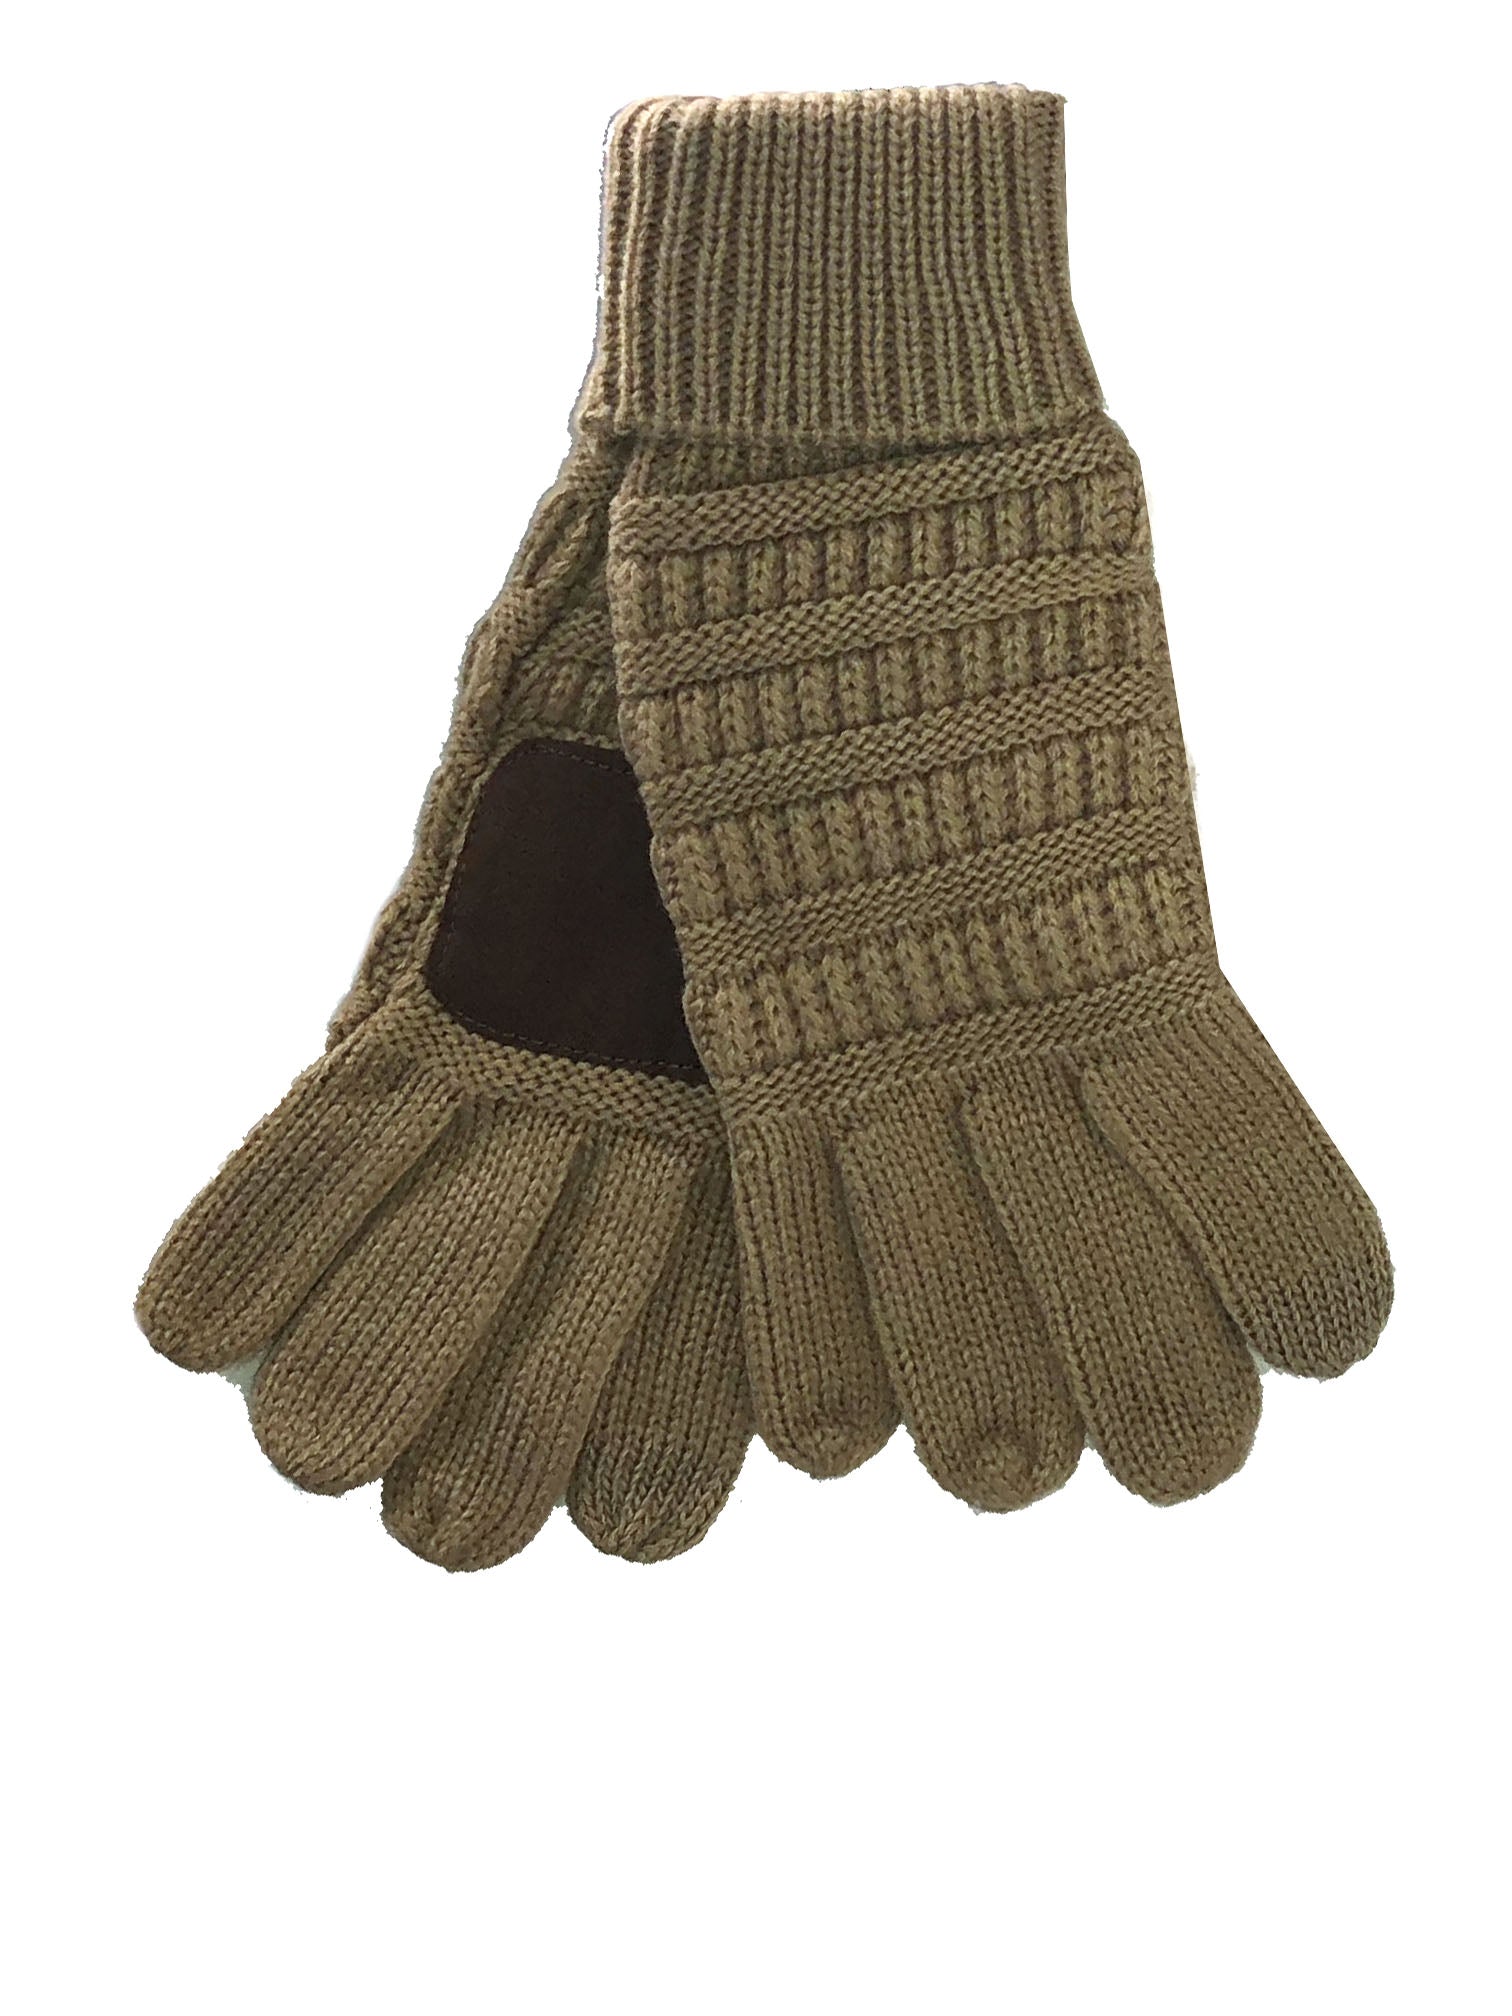 Canis - Cxs CITA II gloves, anti-cut, gray, size 09 b1 / 120 -  CN-3630-002-700-09 - merXu - Negotiate prices! Wholesale purchases!